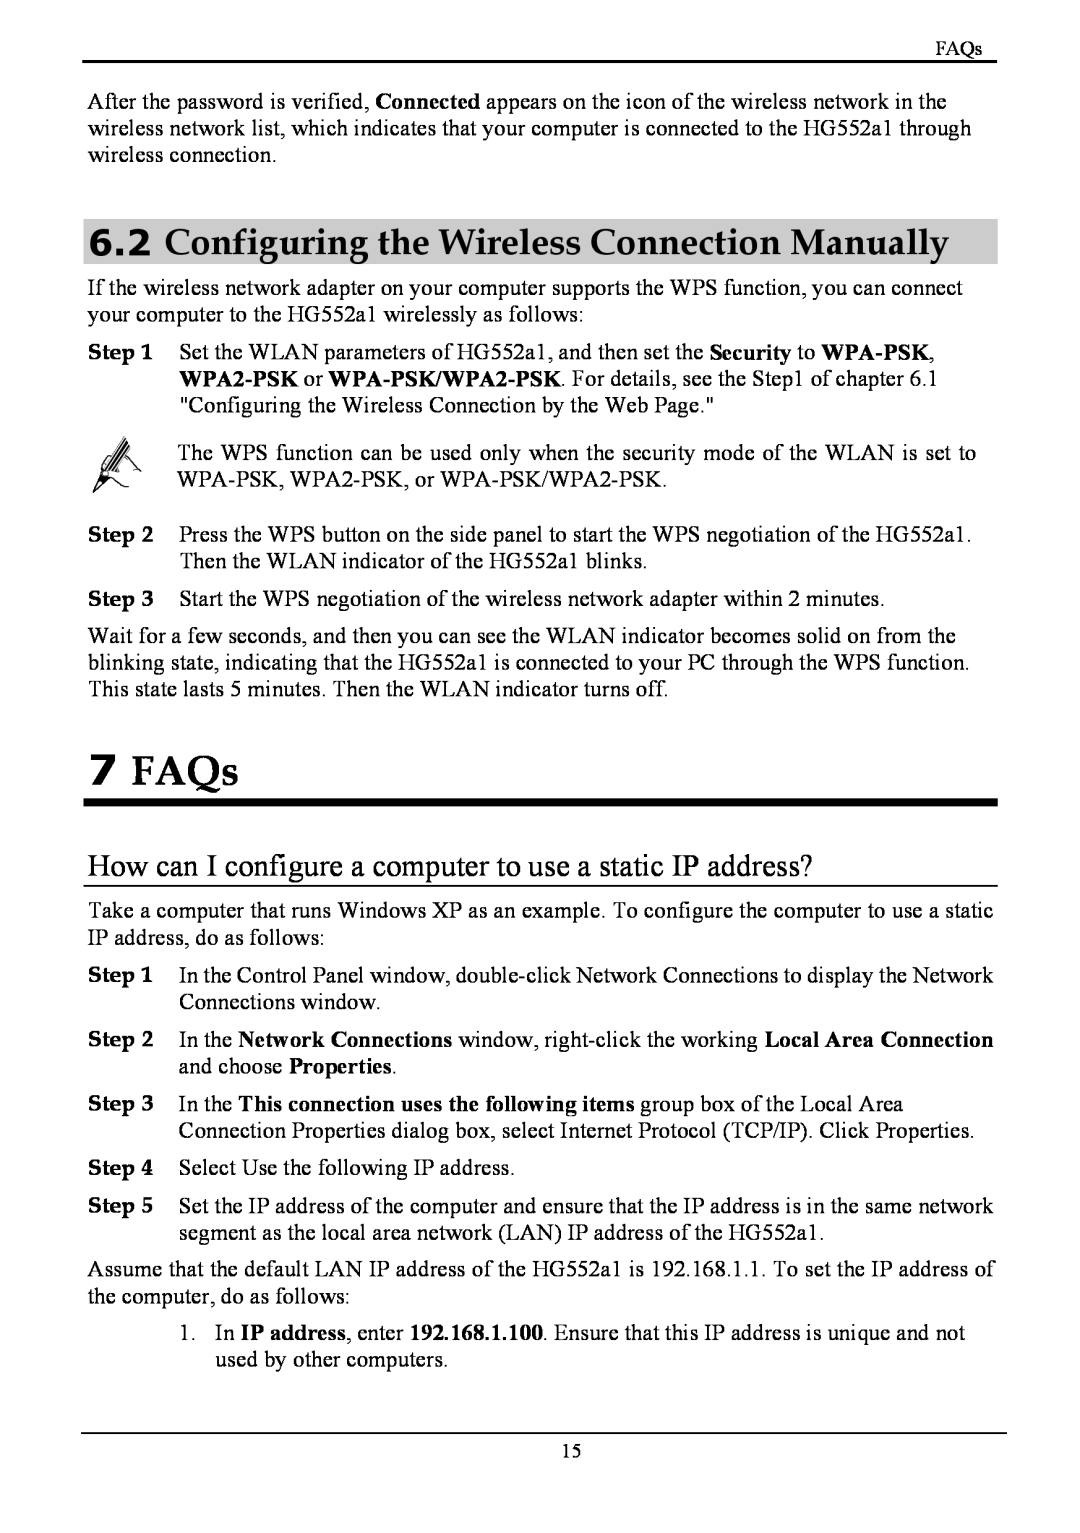 Huawei HG552a1 manual FAQs, Configuring the Wireless Connection Manually 